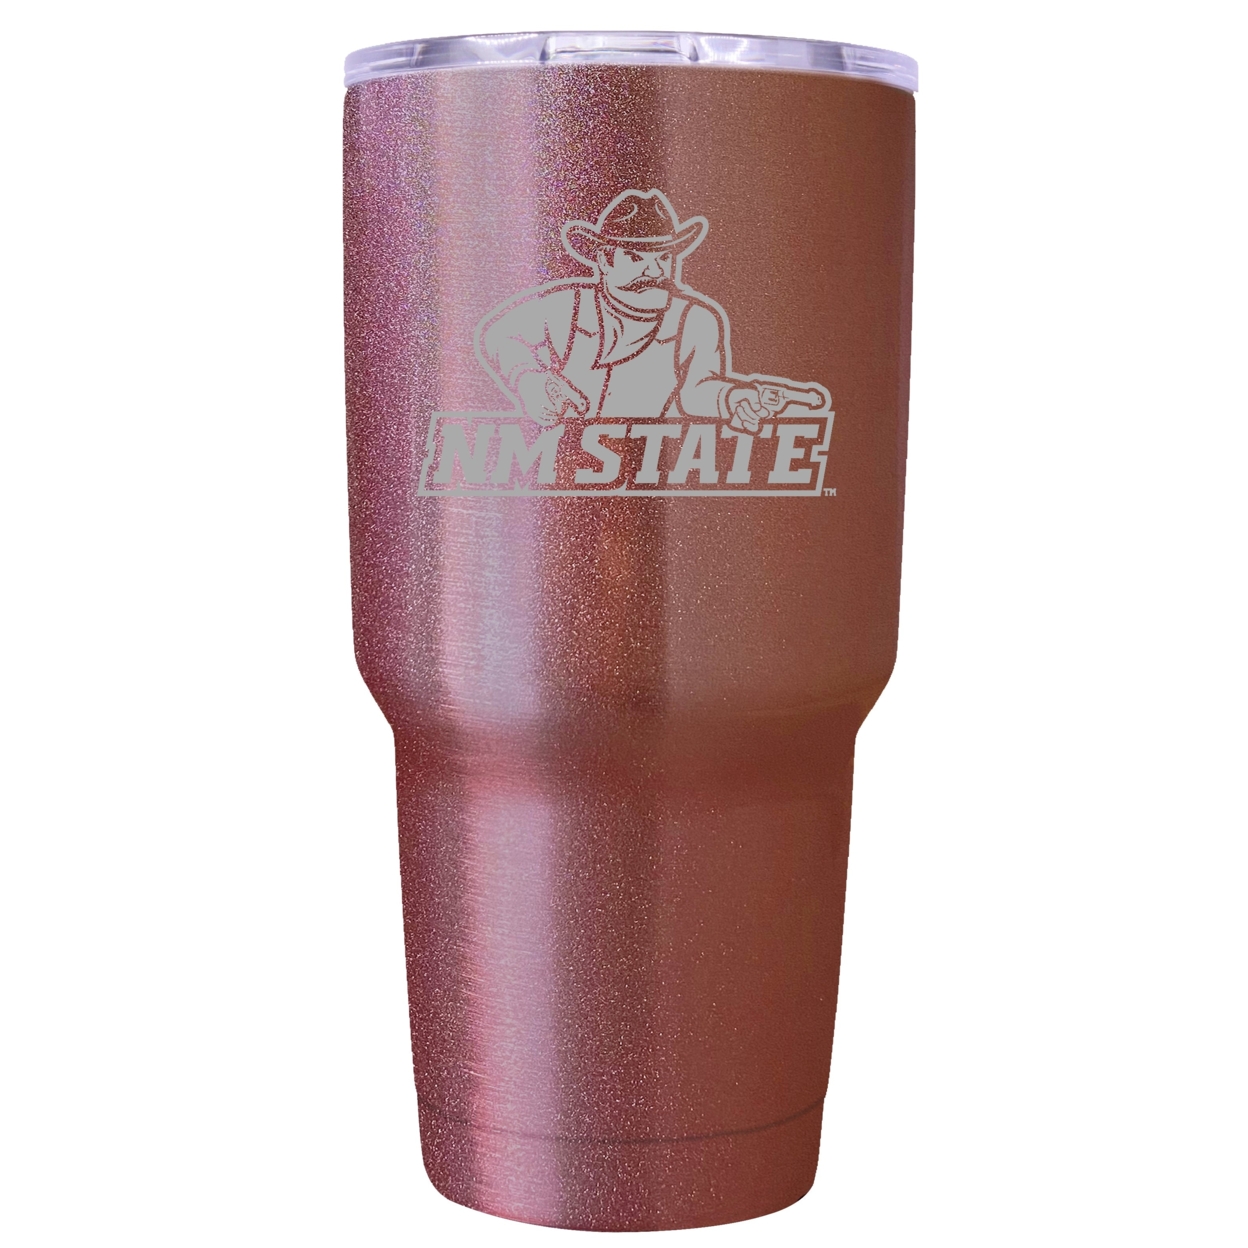 New Mexico State University Pistol Pete 24 Oz Insulated Tumbler Etched - Rose Gold